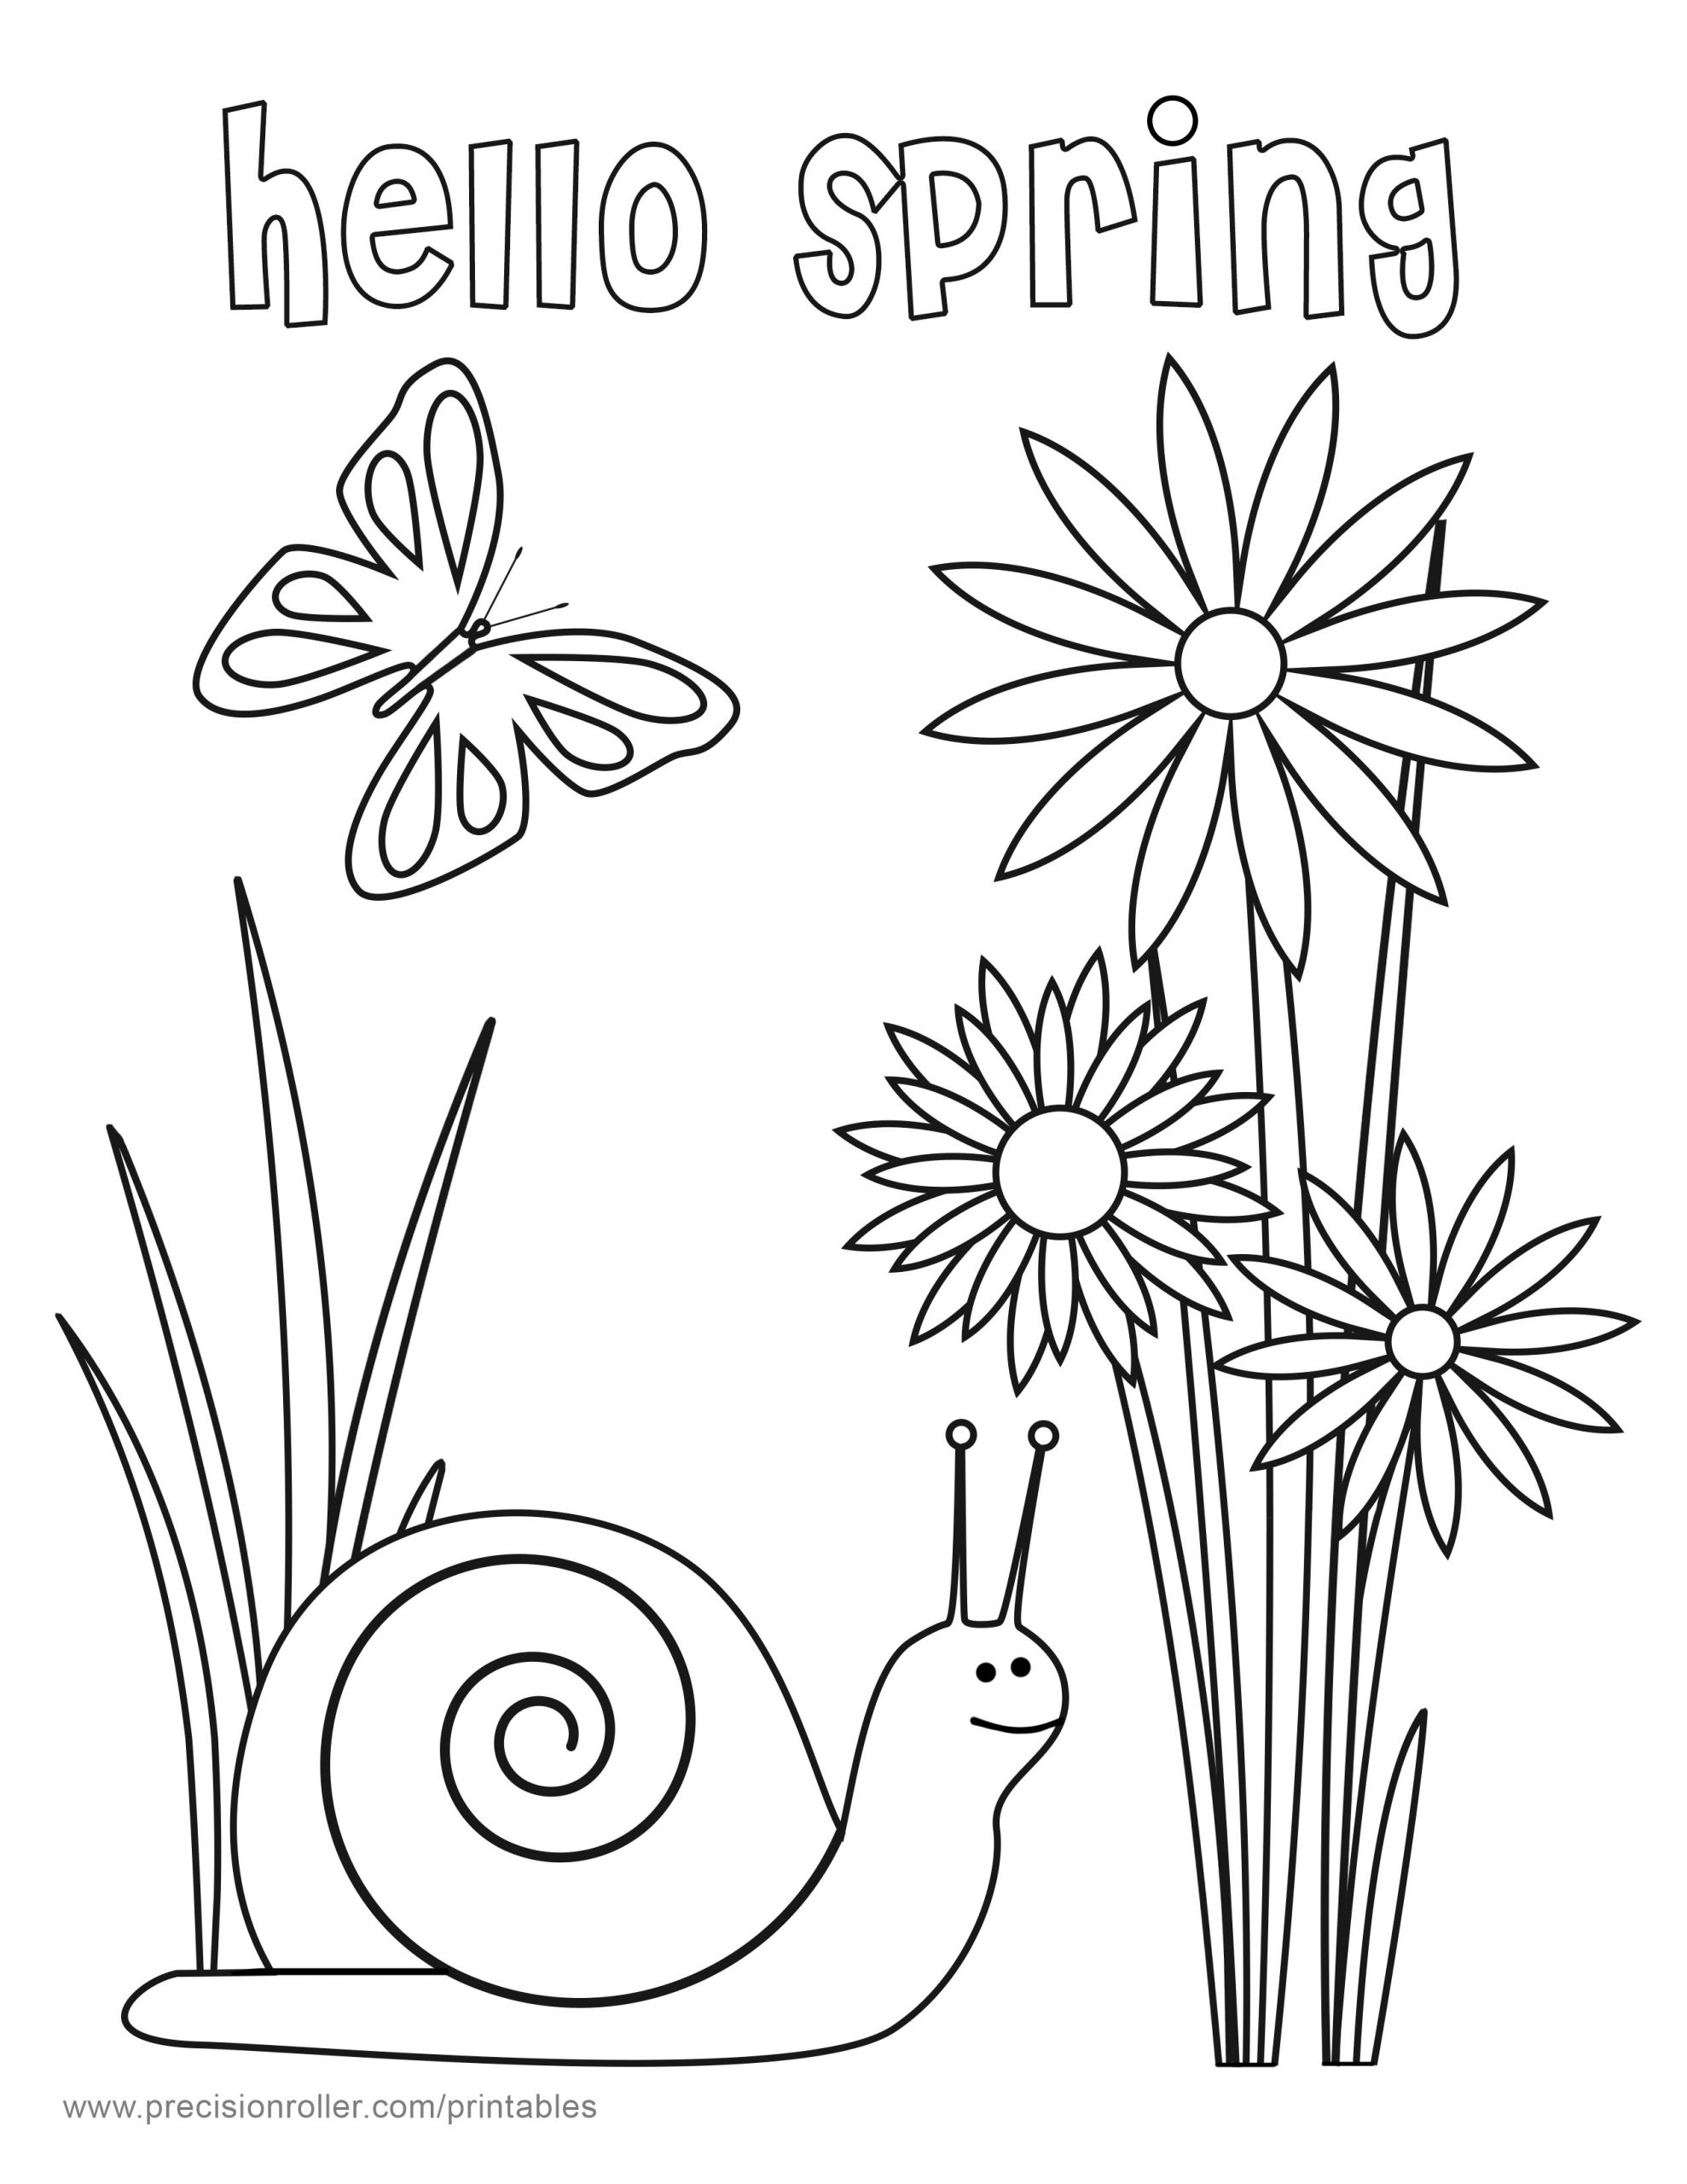 Printable Spring Coloring Pages
 Hello Spring Coloring Page Precision Printables